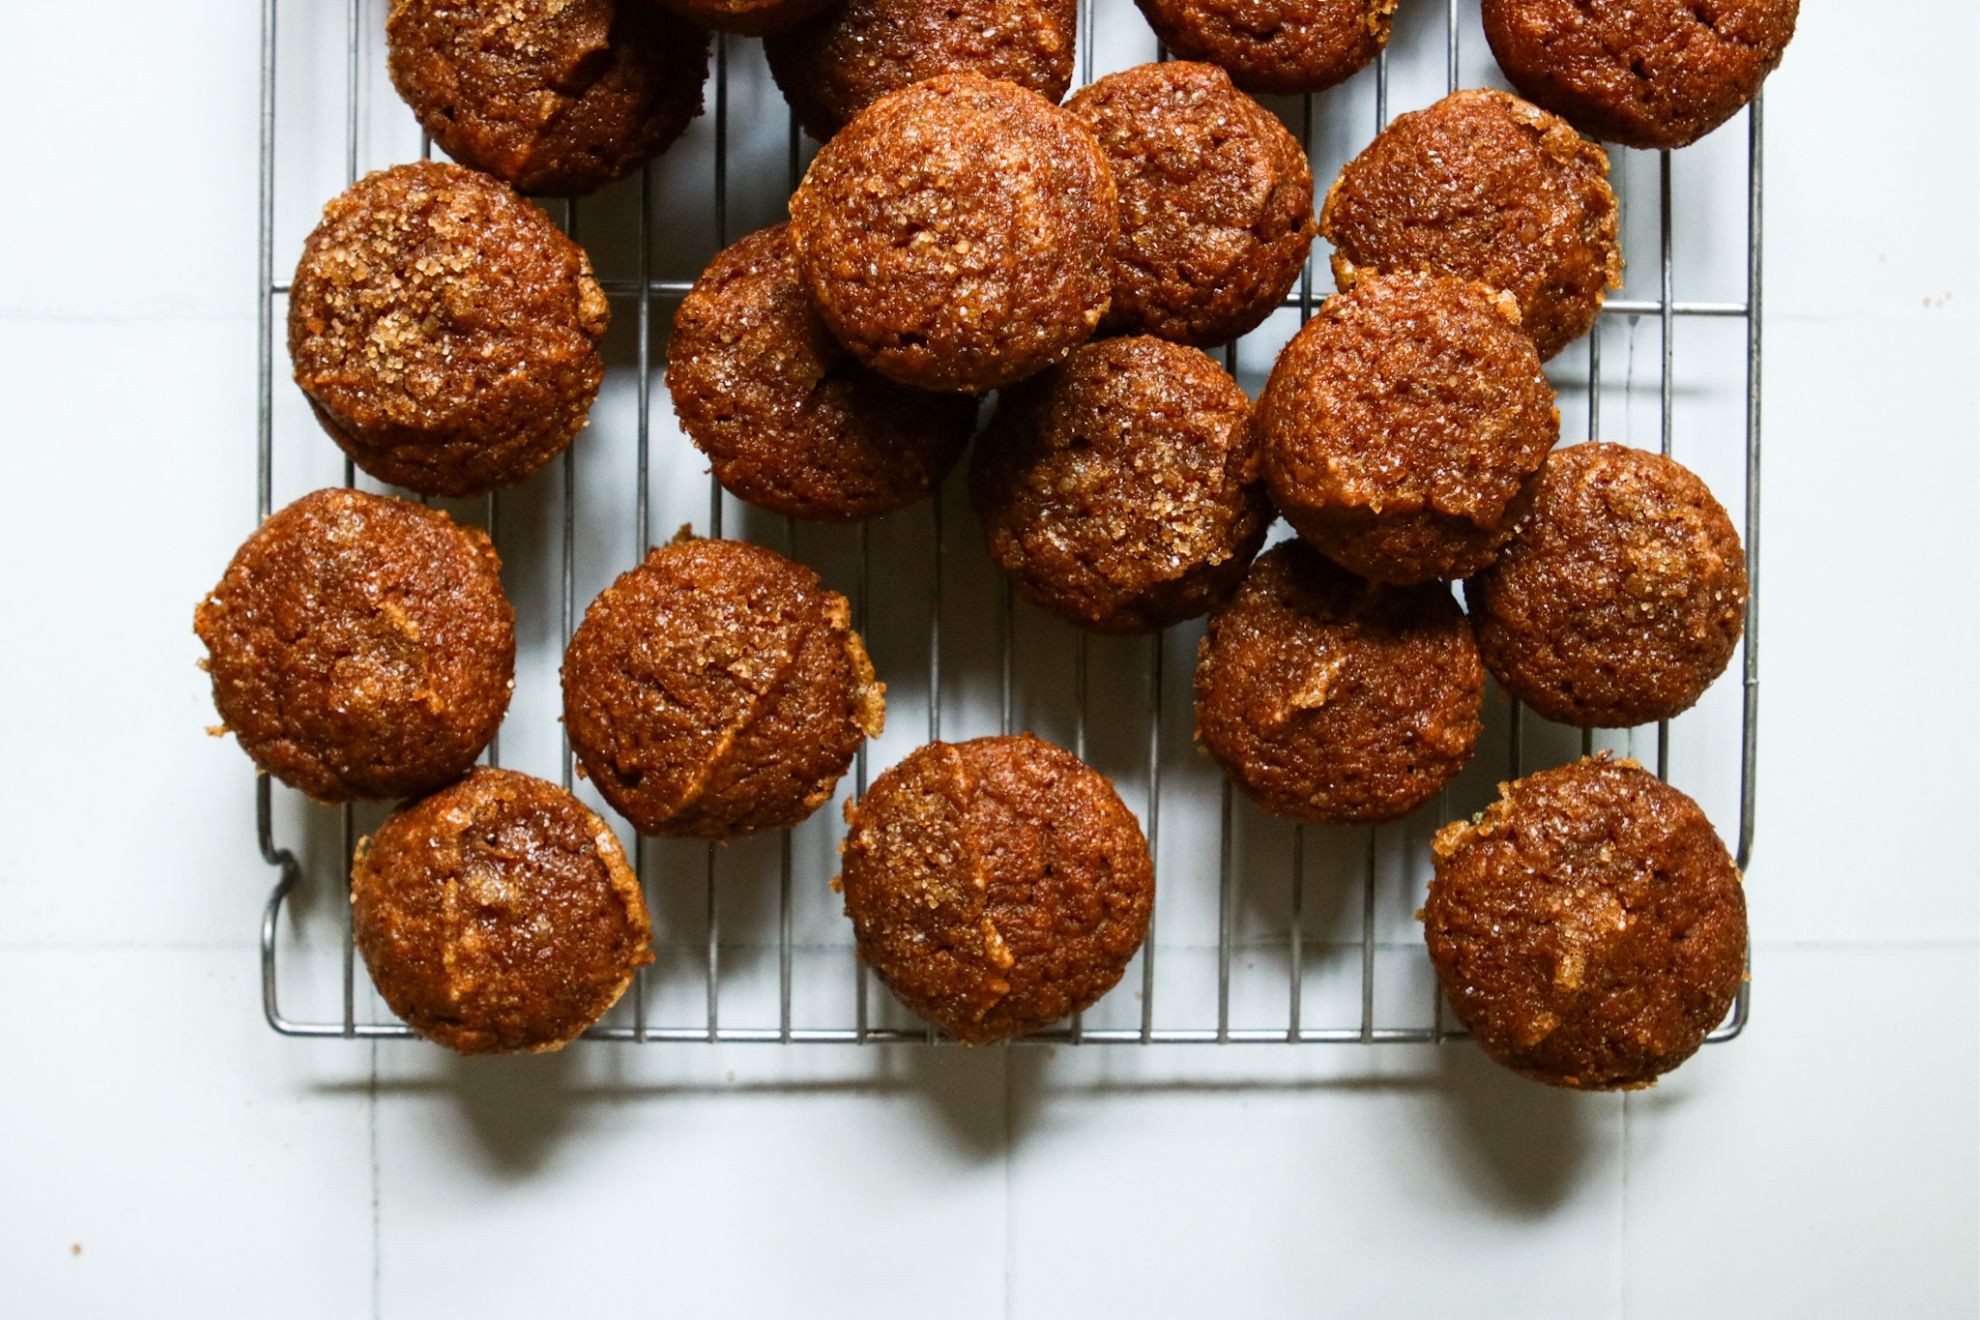 This is an overhead horizontal image of mini pumpkin muffins on a silver cooling rack. The muffins are a rich pumpkin-y color and topped with a brown sugar. Some muffins are stacked on top of others. The cooling rack sits on a white square tile surface.